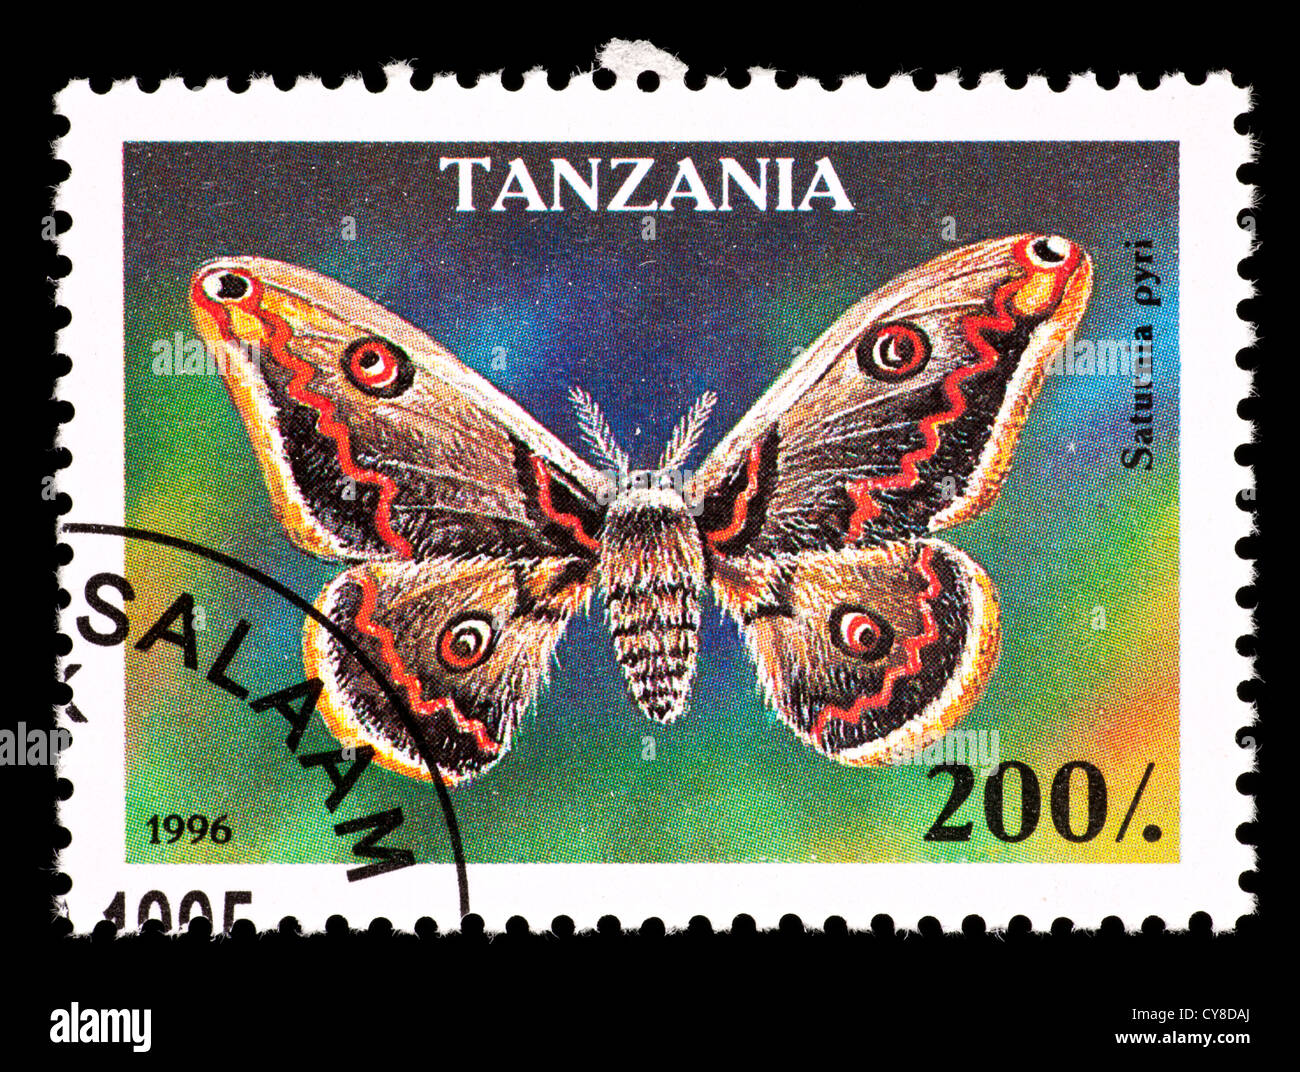 Postage stamp from Tanzania depicting a Giant Peacock Moth (Saturnia pyri) Stock Photo